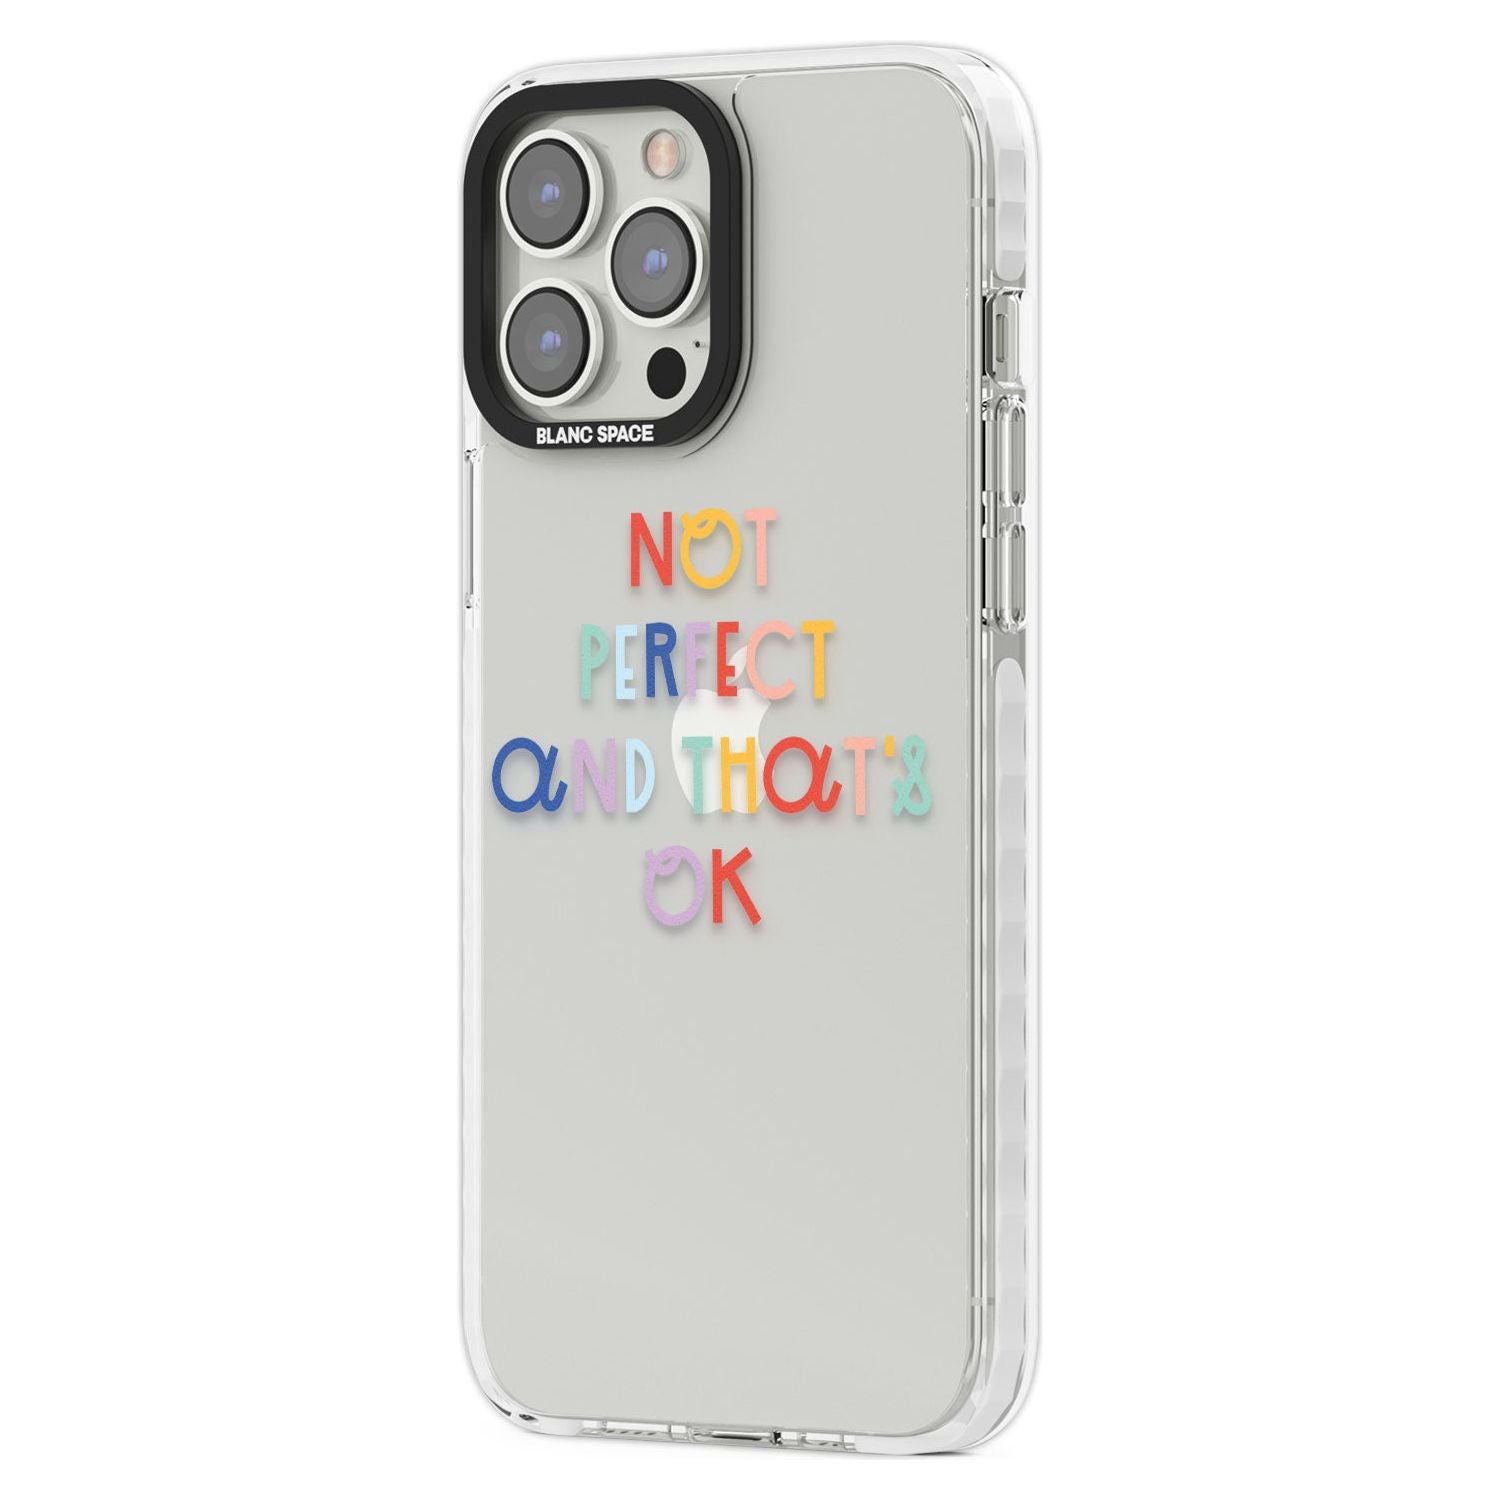 Not Perfect - Clear Phone Case iPhone 15 Pro Max / Black Impact Case,iPhone 15 Plus / Black Impact Case,iPhone 15 Pro / Black Impact Case,iPhone 15 / Black Impact Case,iPhone 15 Pro Max / Impact Case,iPhone 15 Plus / Impact Case,iPhone 15 Pro / Impact Case,iPhone 15 / Impact Case,iPhone 15 Pro Max / Magsafe Black Impact Case,iPhone 15 Plus / Magsafe Black Impact Case,iPhone 15 Pro / Magsafe Black Impact Case,iPhone 15 / Magsafe Black Impact Case,iPhone 14 Pro Max / Black Impact Case,iPhone 14 Plus / Black I